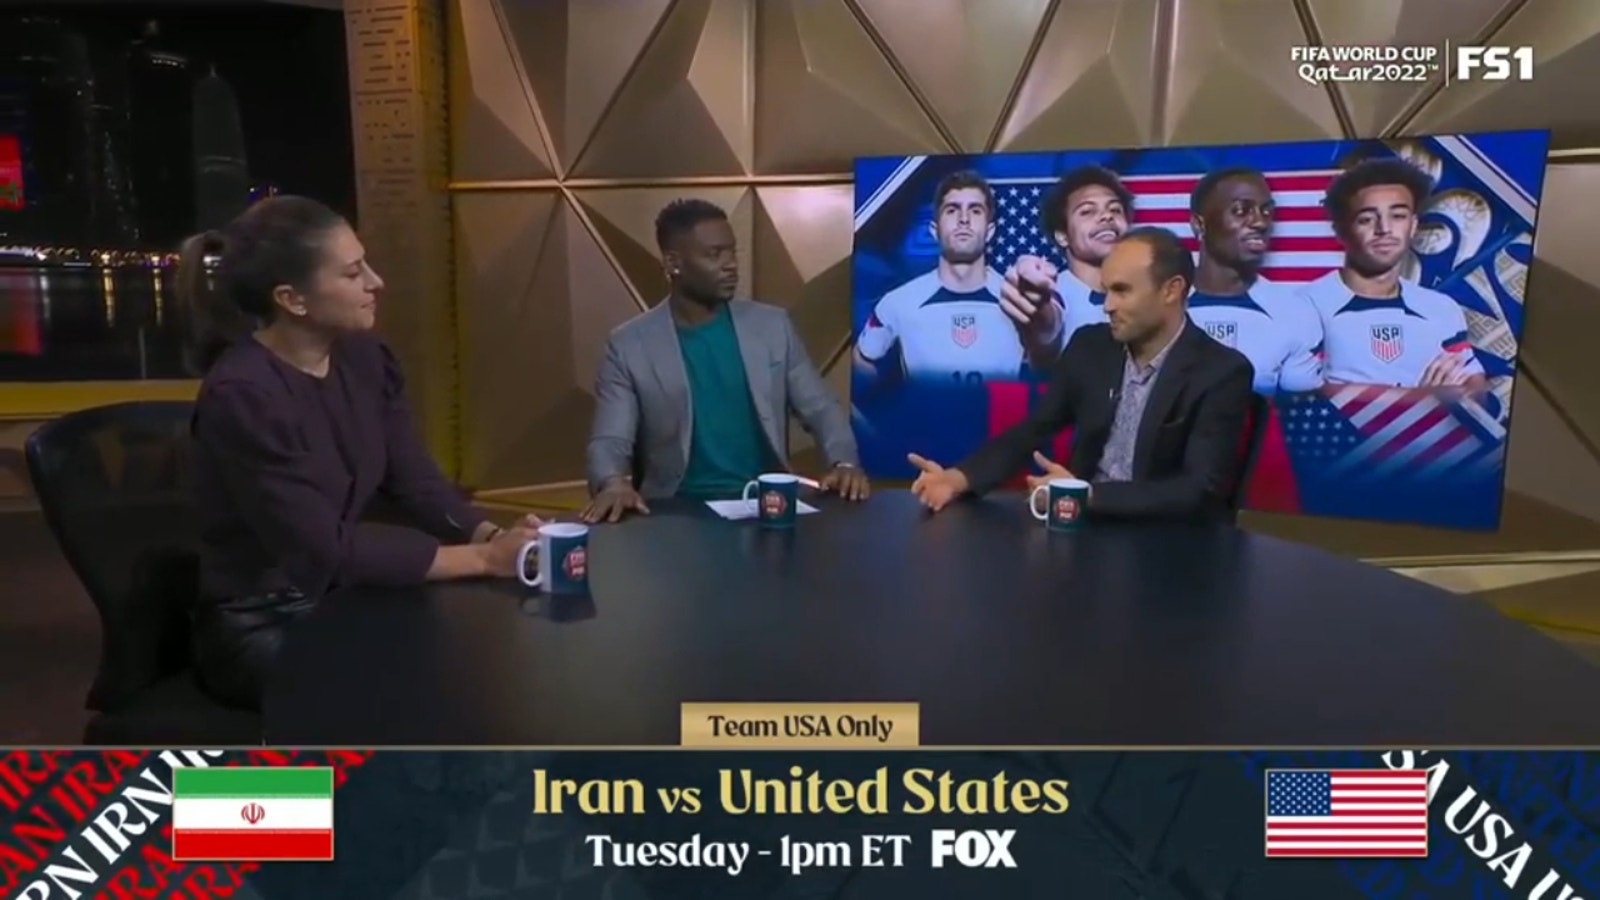 Iran vs. United States Preview: Will the USMNT make it out of the Group Stage? 